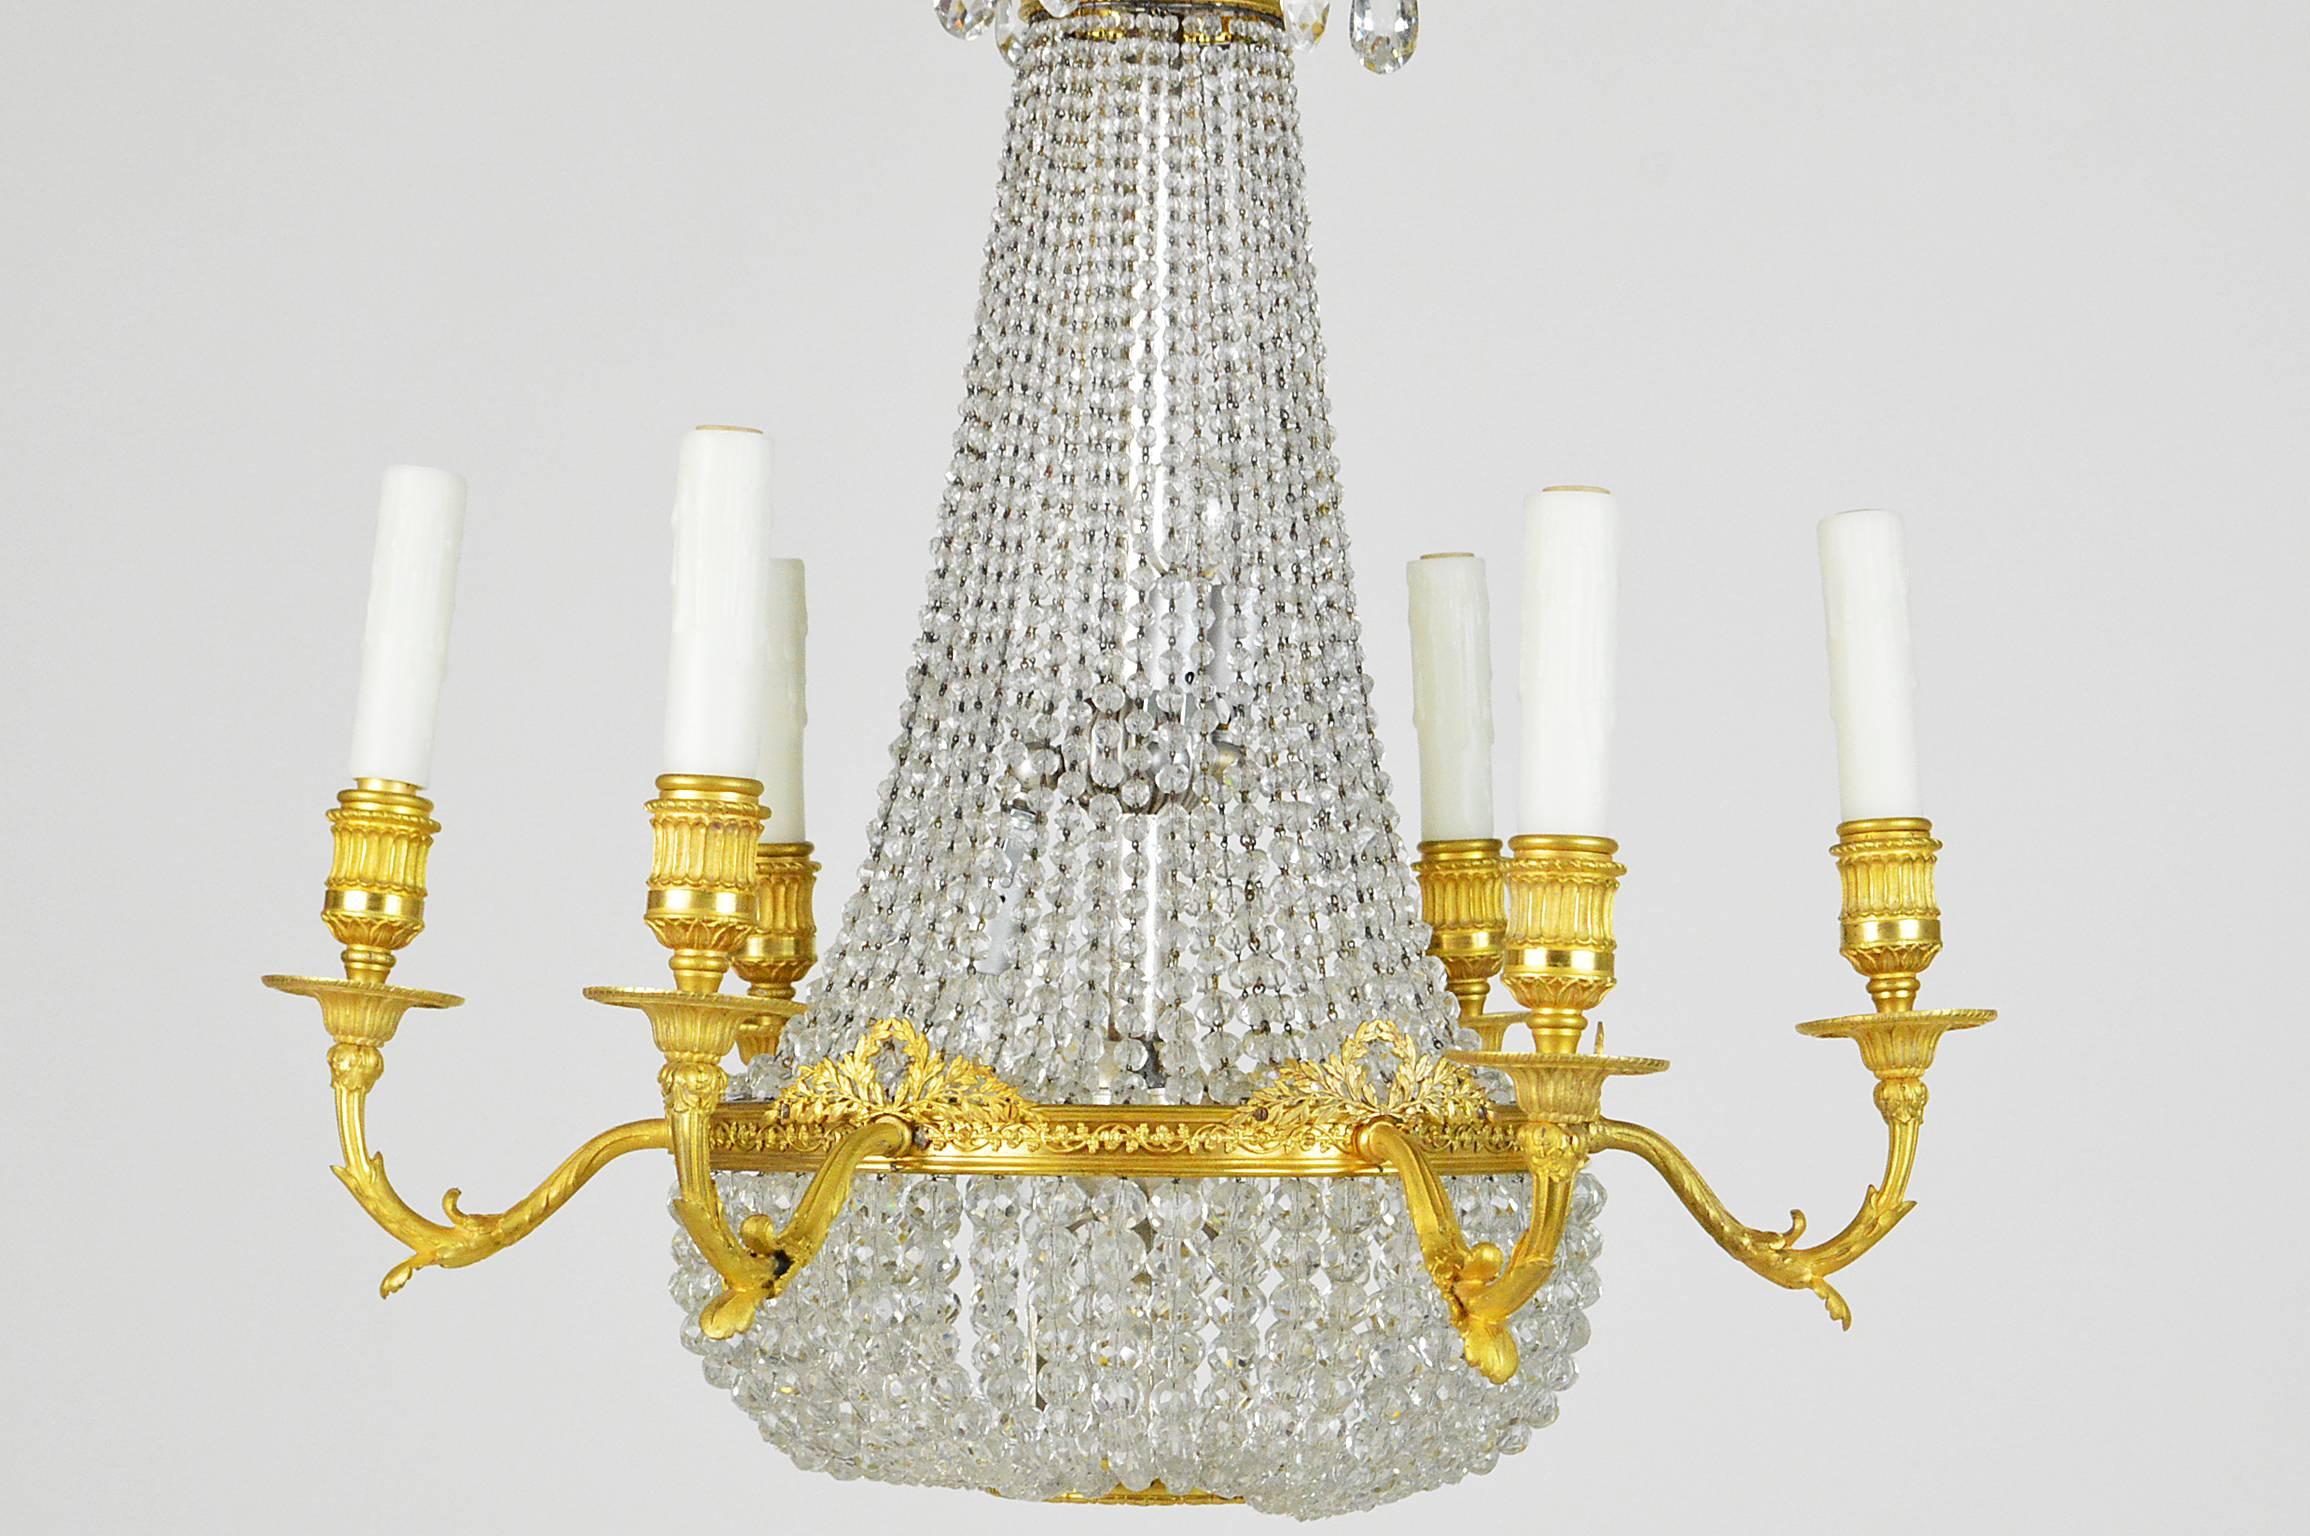 French Empire style gilt bronze and beaded six-light chandelier attributed to E.F. Caldwell, NY having a basket-shaped beaded glass body and foliate bronze designs along the crown and arms. Having its original gold-plated ceiling medallion for